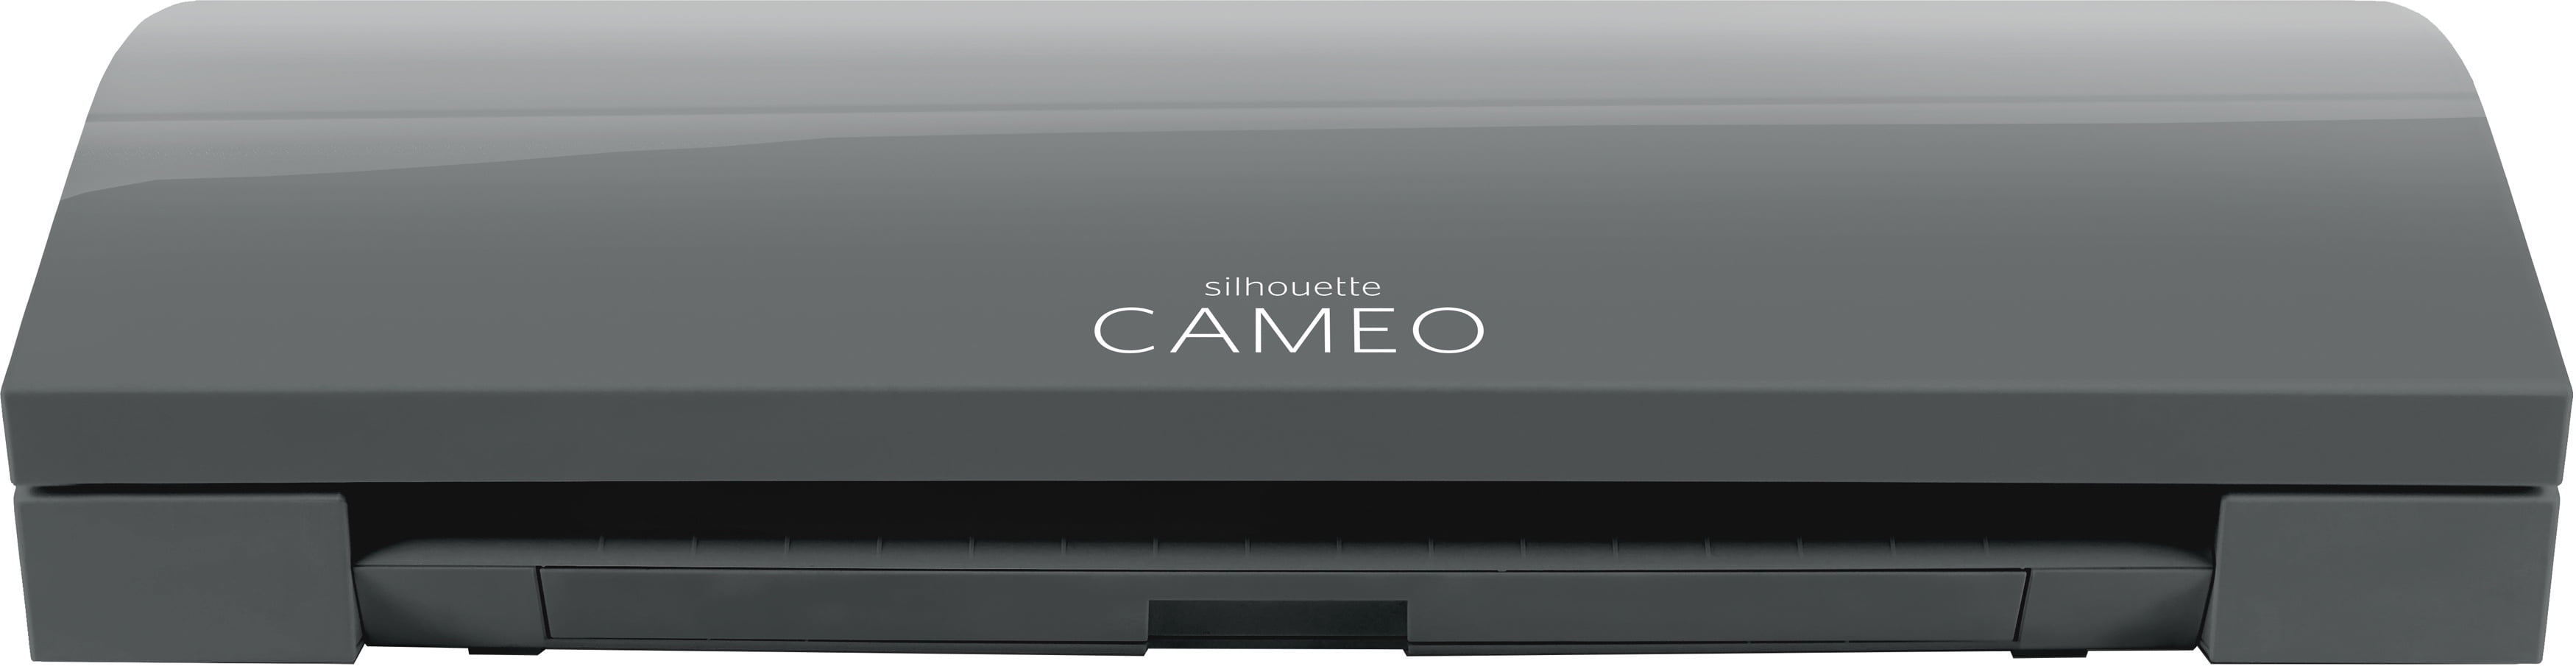 Silhouette Cameo 3 Wireless Cutting Machine SILH-CAMEO-3-LGRN-4T- Light  Green Limited Edition Color